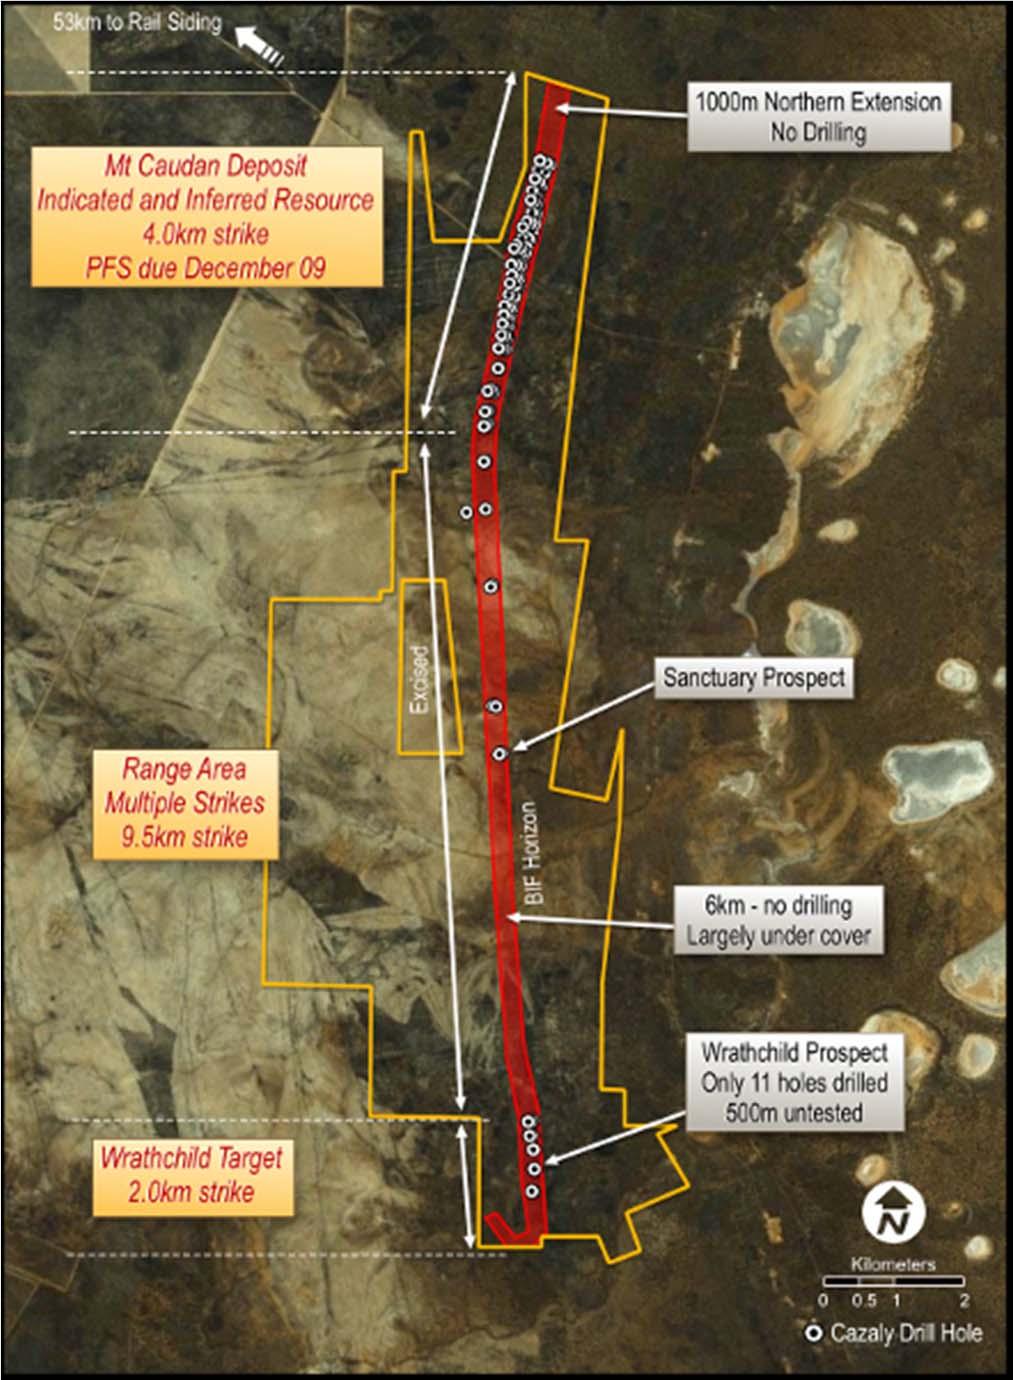 Parker Range Iron Ore Project Mount Caudan Iron Ore Deposit 100% owned by Cazaly Total current resource of 35.1Mt @ 55.9% Fe (61.4% CaFe) Low waste to Ore stripping ratio (2.3:1) Mine to produce 31.